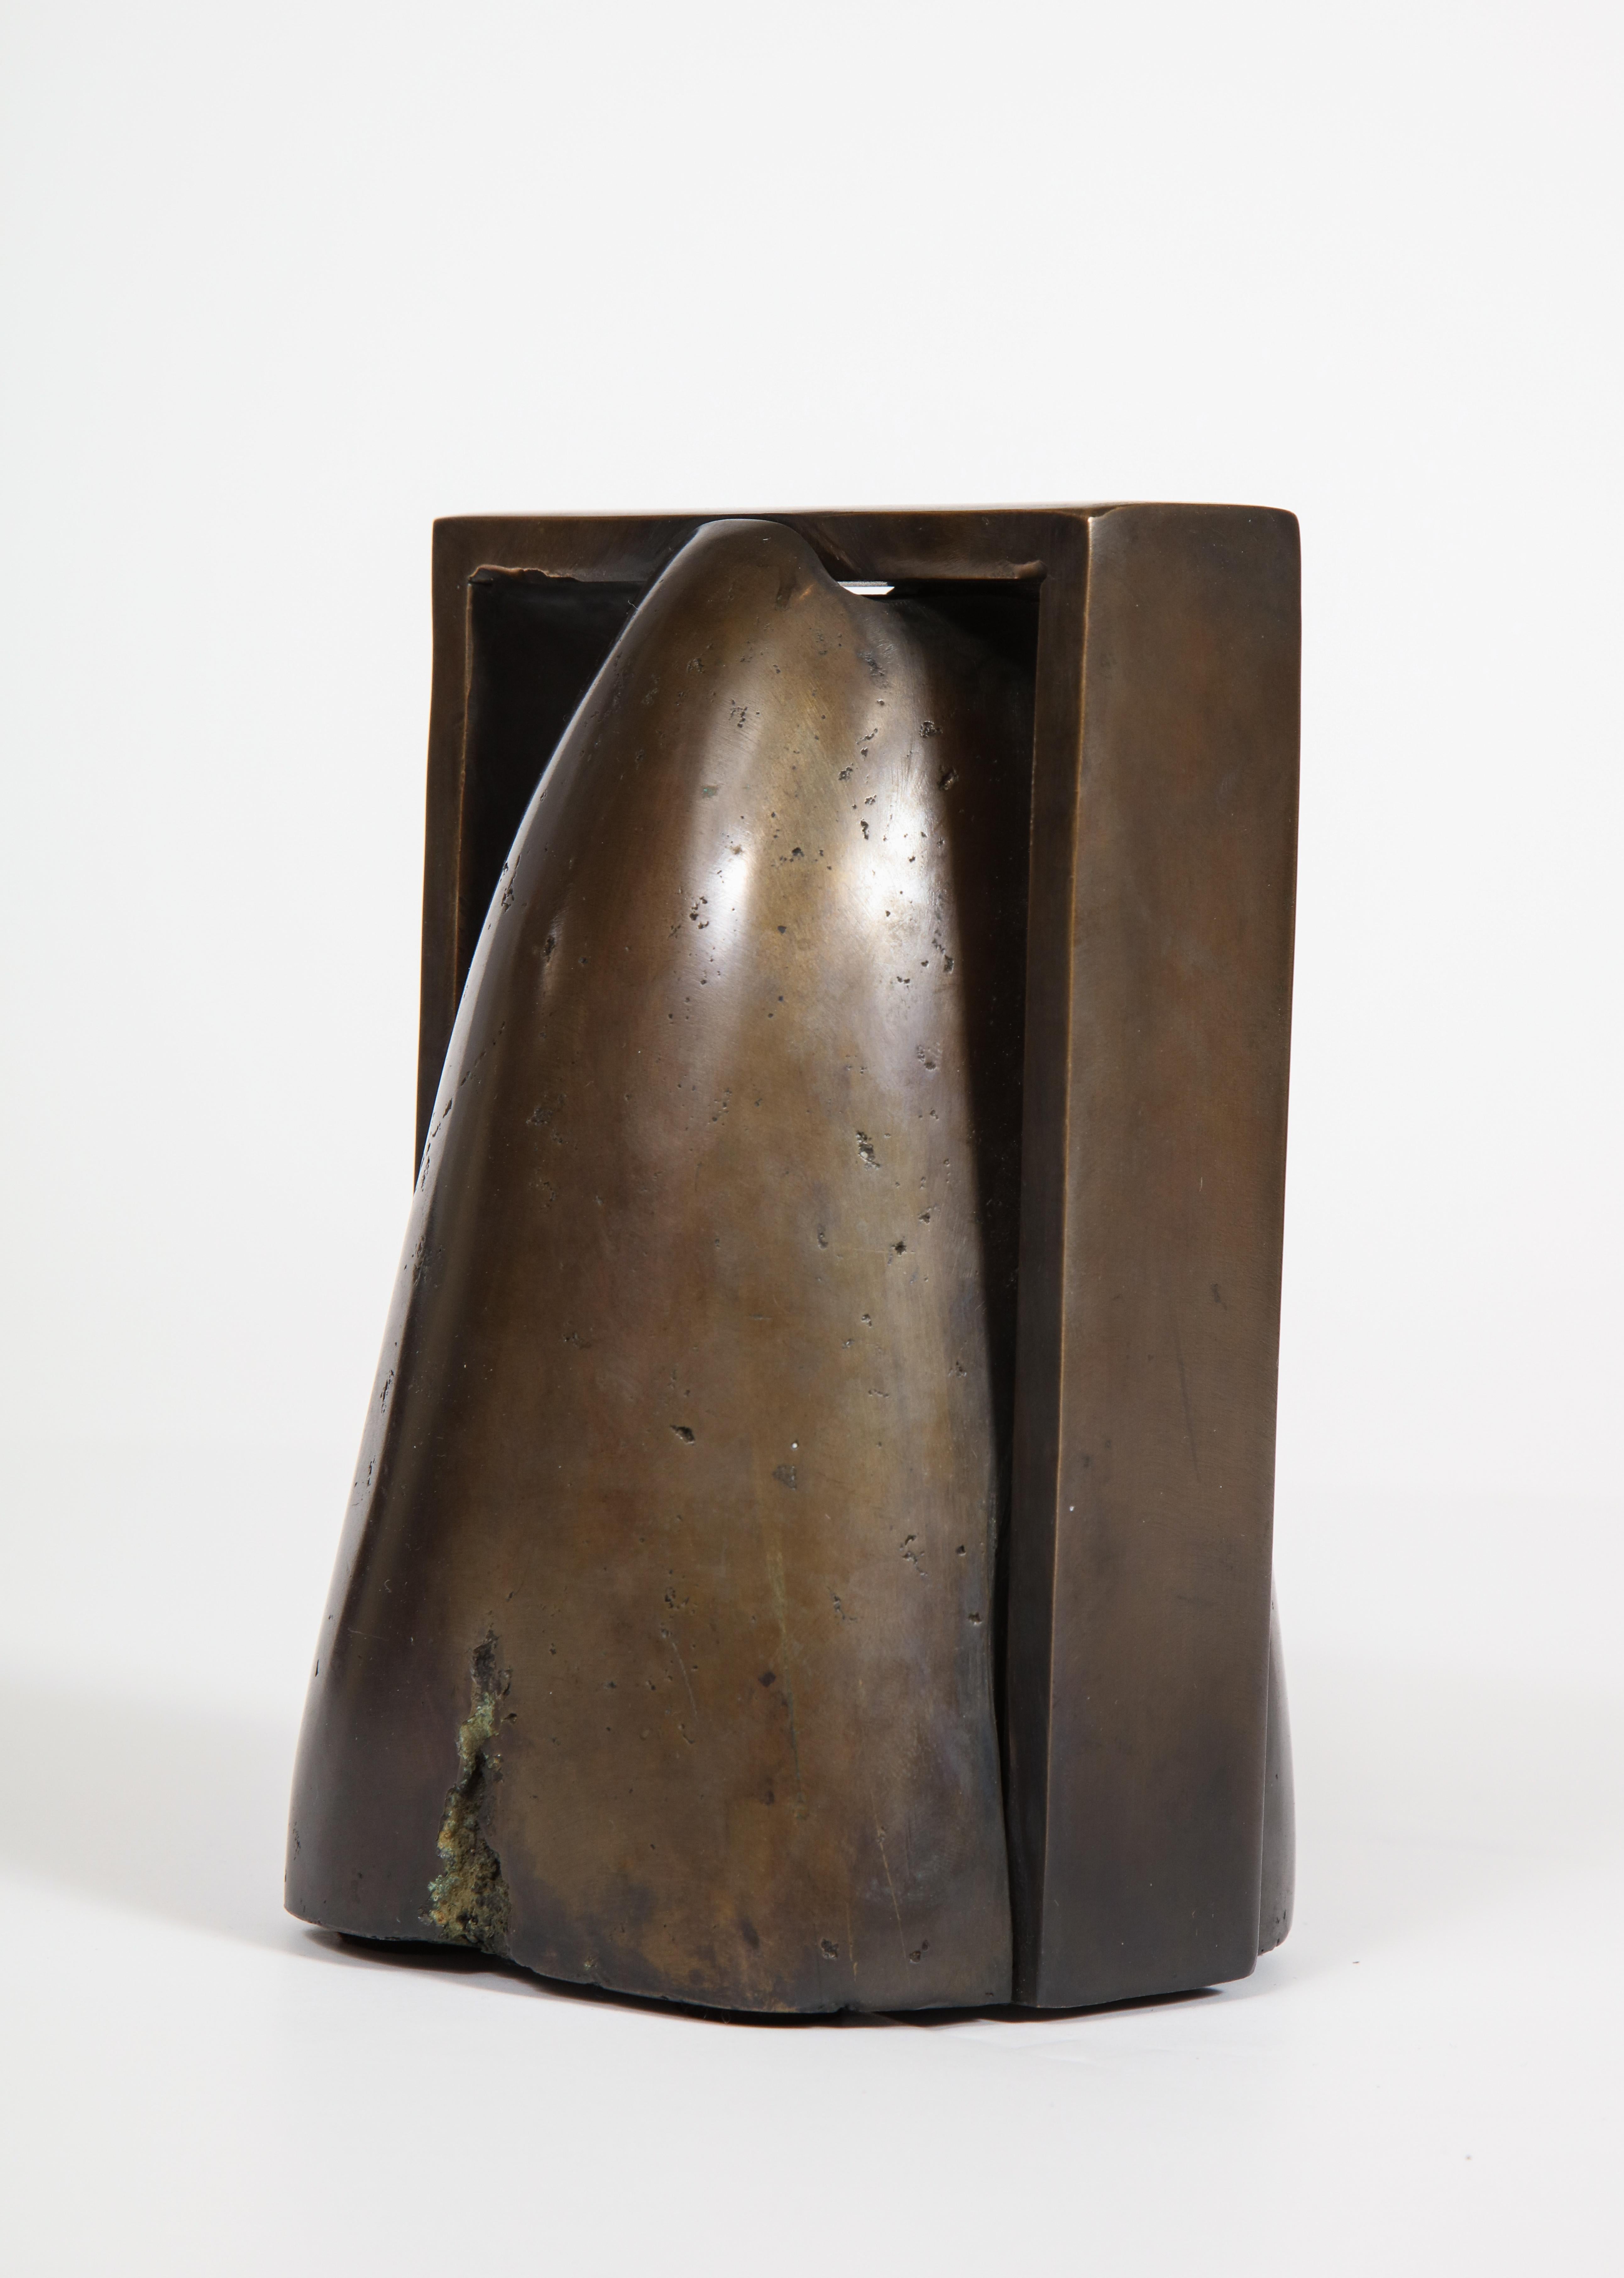 “Massah” (Small Dome), 1999 - Abstract Geometric Sculpture by Jay Wholley